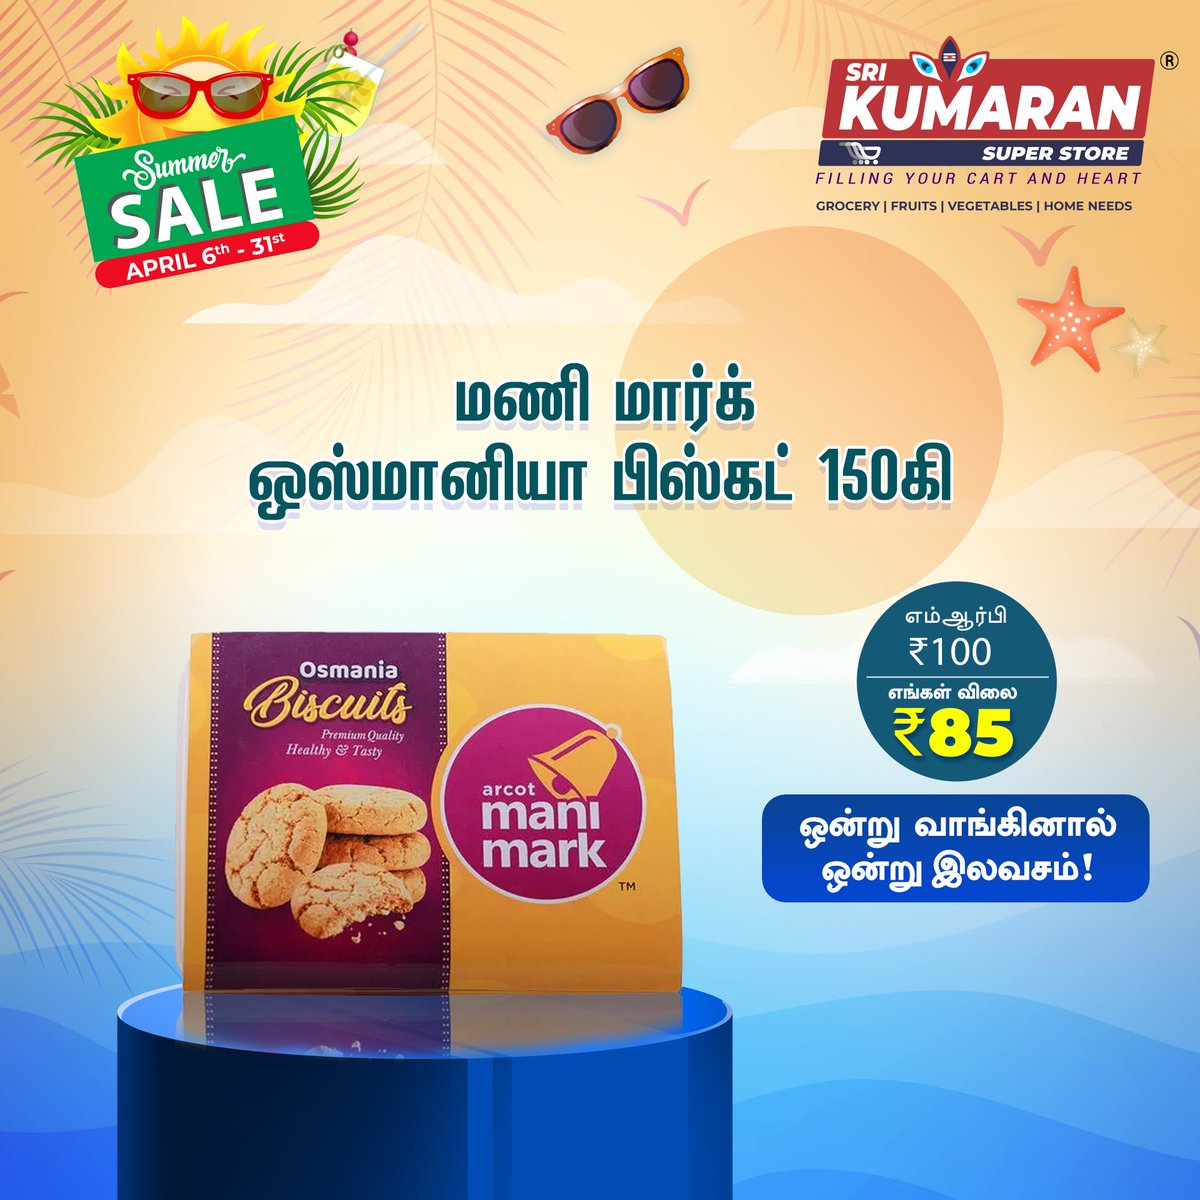 Don't miss out on this delicious deal! Buy 1 pack of Mani Mark Osmania Biscuits and get another one absolutely FREE at Sri Kumaran Super Store. Hurry, while stocks last! 

#YummyDeals #manimark #srikumaransuperstore #pollachi #ManiMark #OsmaniaBiscuit #Buy1Get1Free